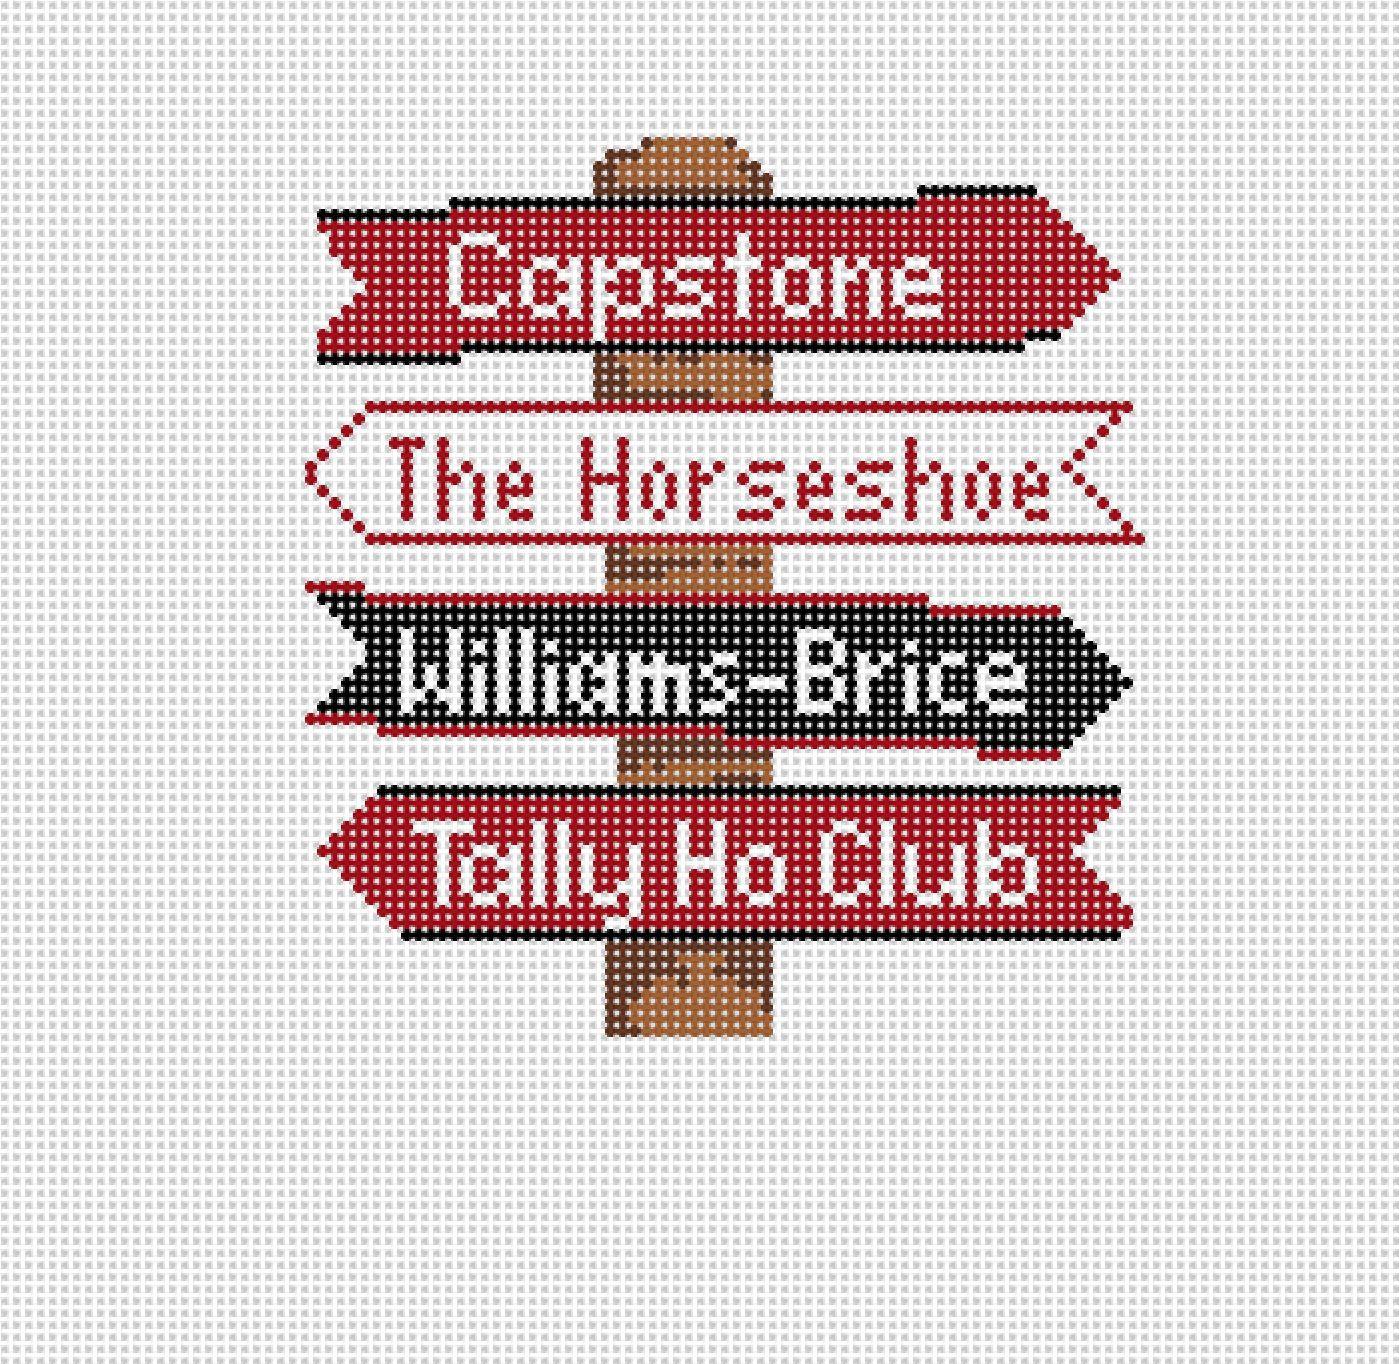 South Carolina College Icon Destination Sign - Needlepoint by Laura